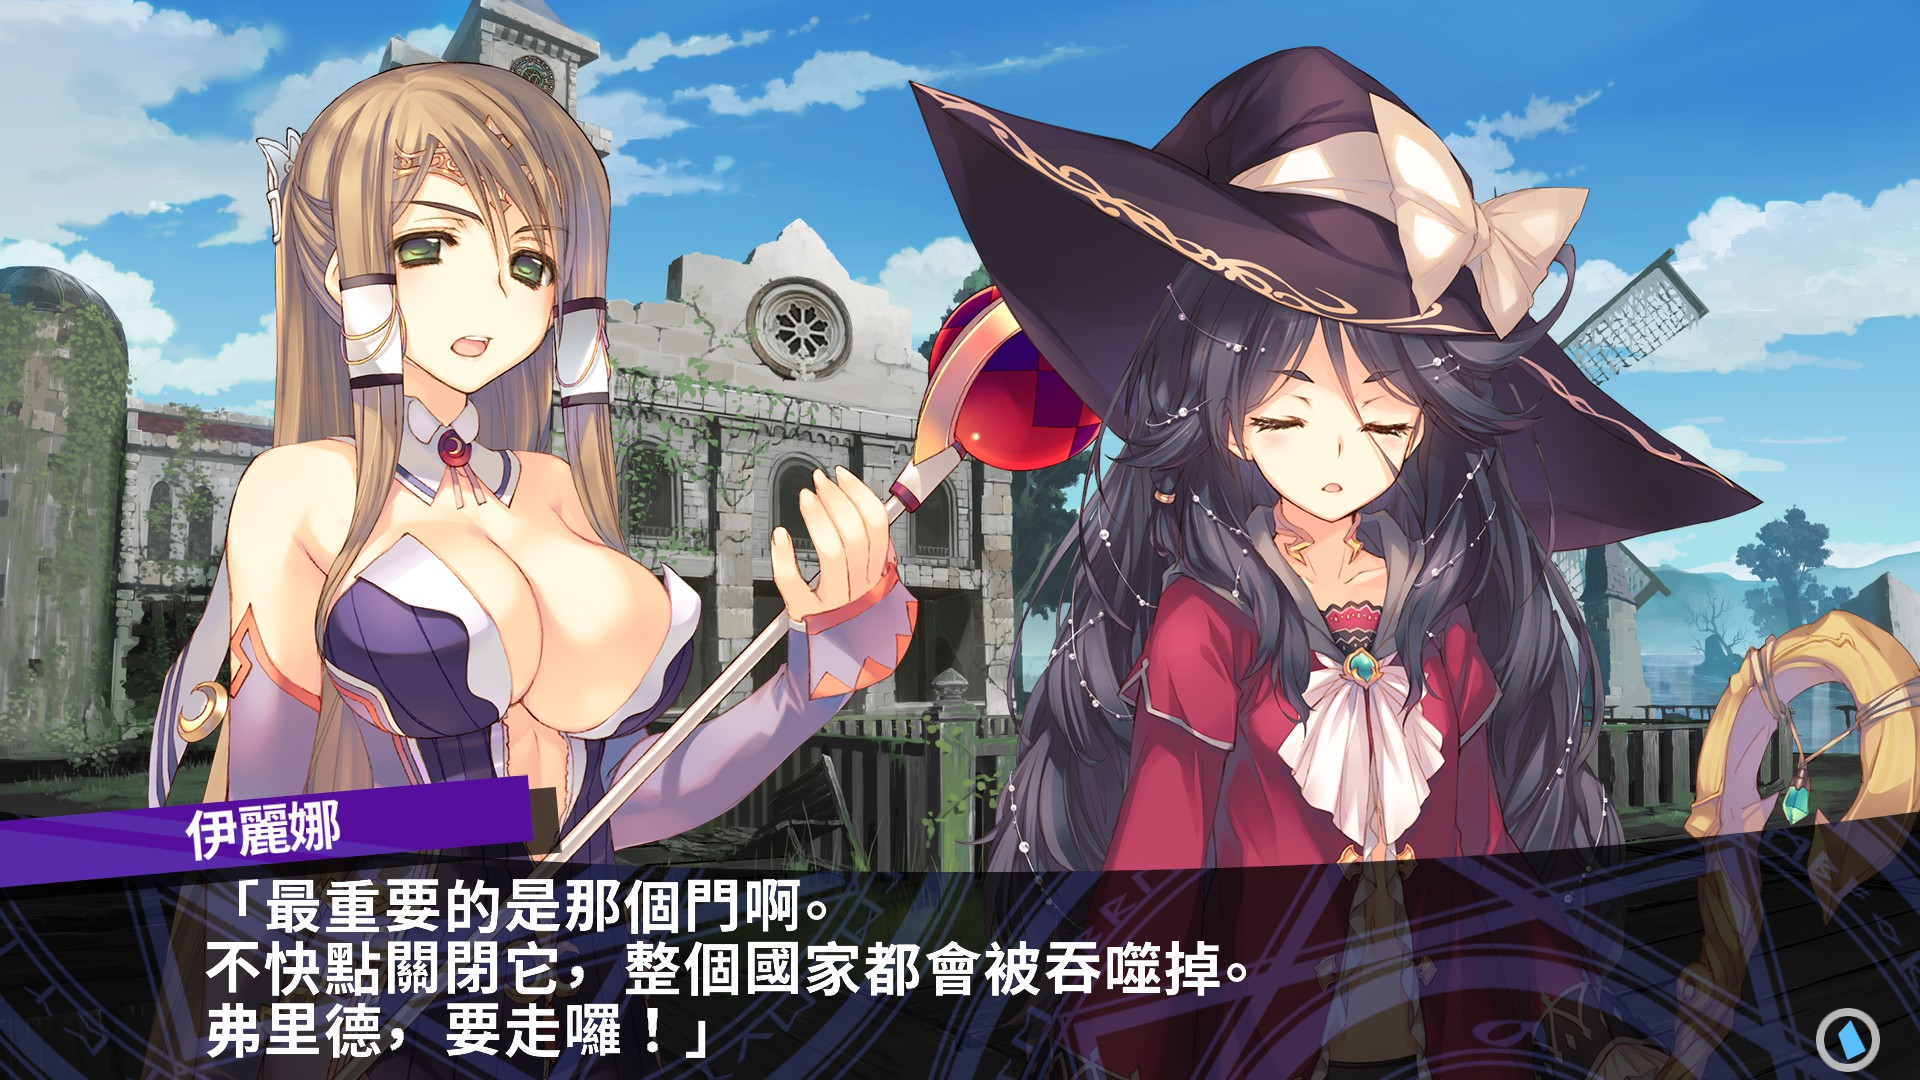 Dungeon Travelers 2-2: The Fallen Maidens & the Book of Beginnings (Traditional Chinese) - RPG - 3 - Select